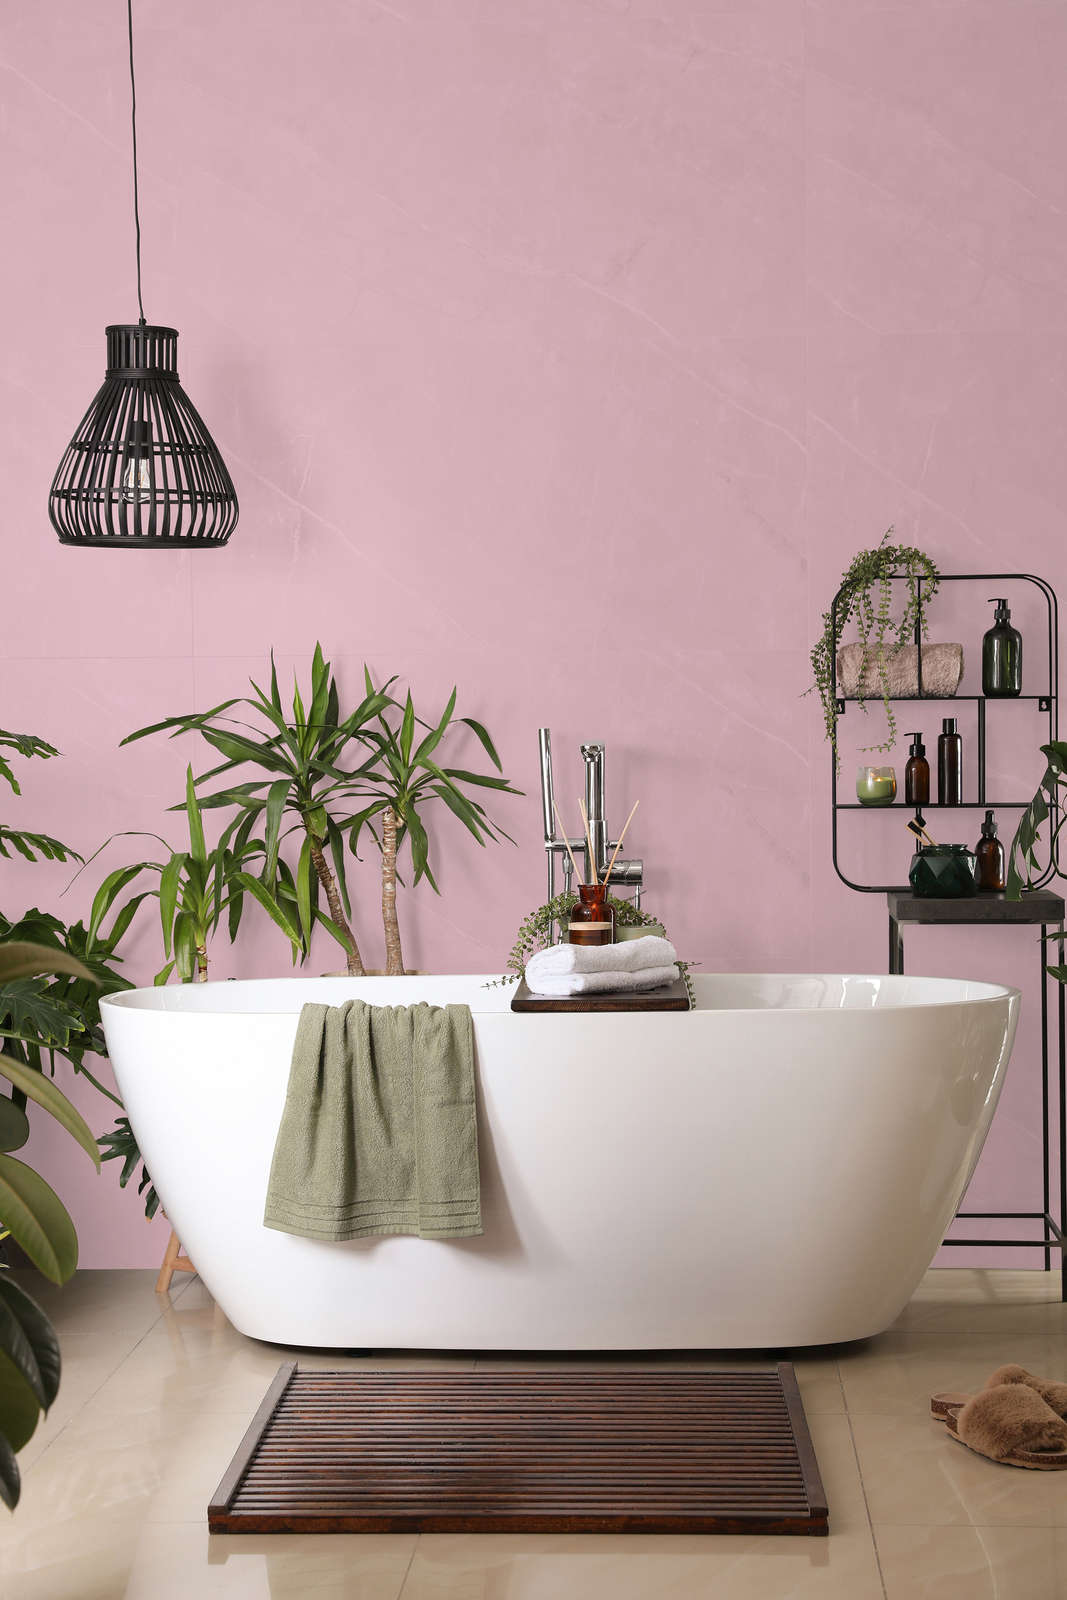             Premium Wall Paint serene pink »Beautiful Berry« NW209 – 2.5 litre
        